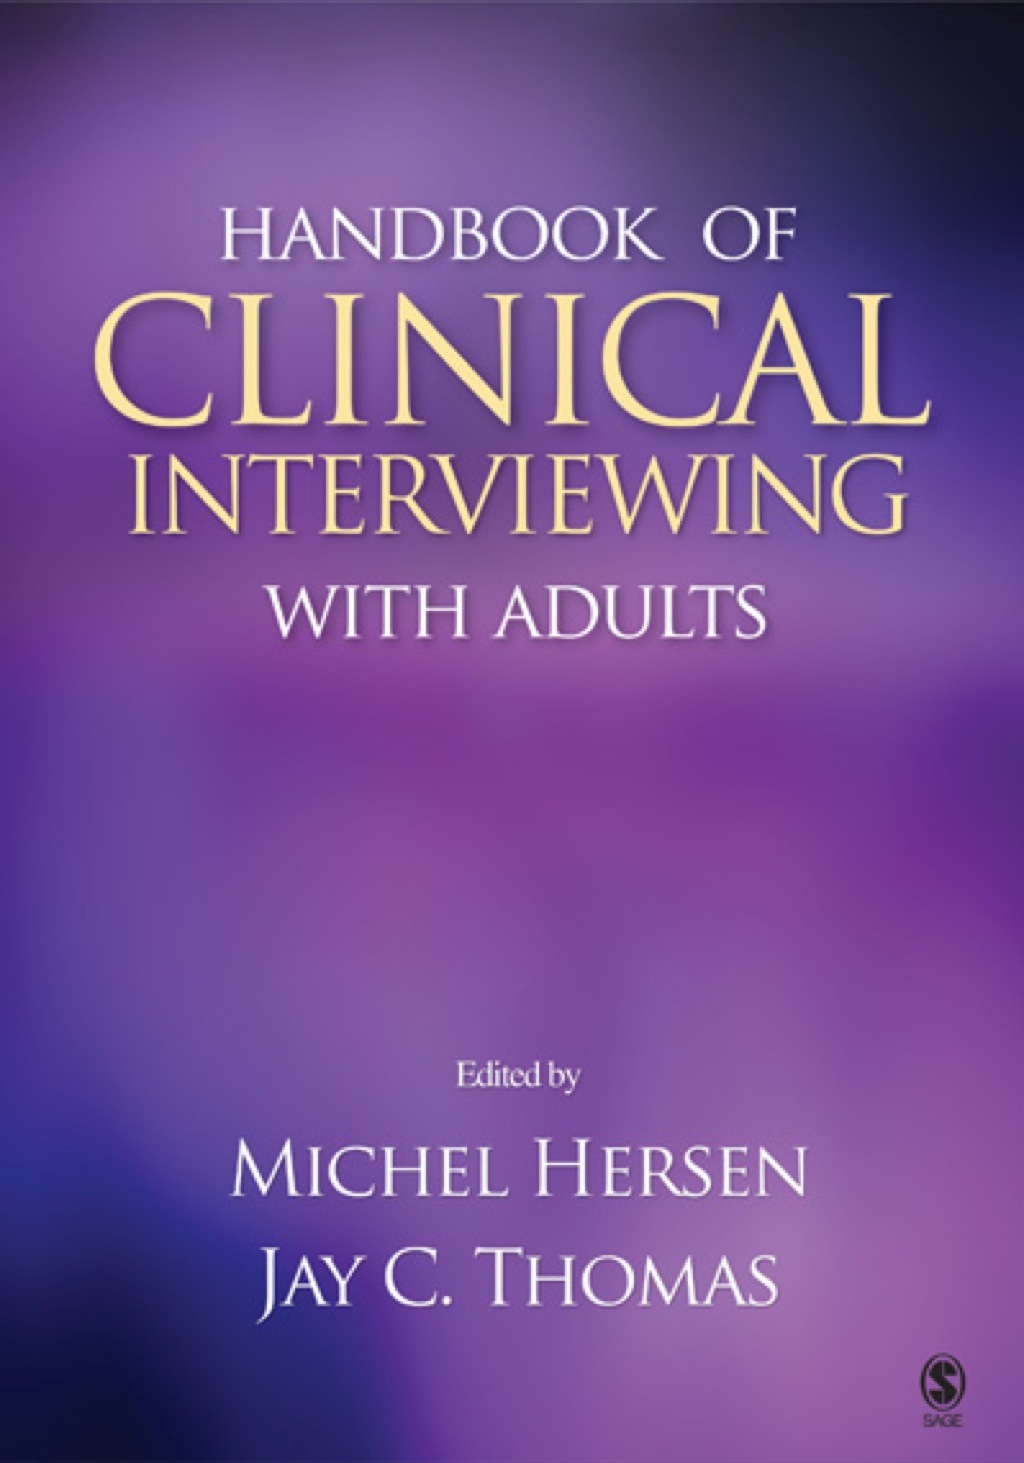 Handbook of Clinical Interviewing With Adults (eBook) - Michel Hersen; Jay C. Thomas